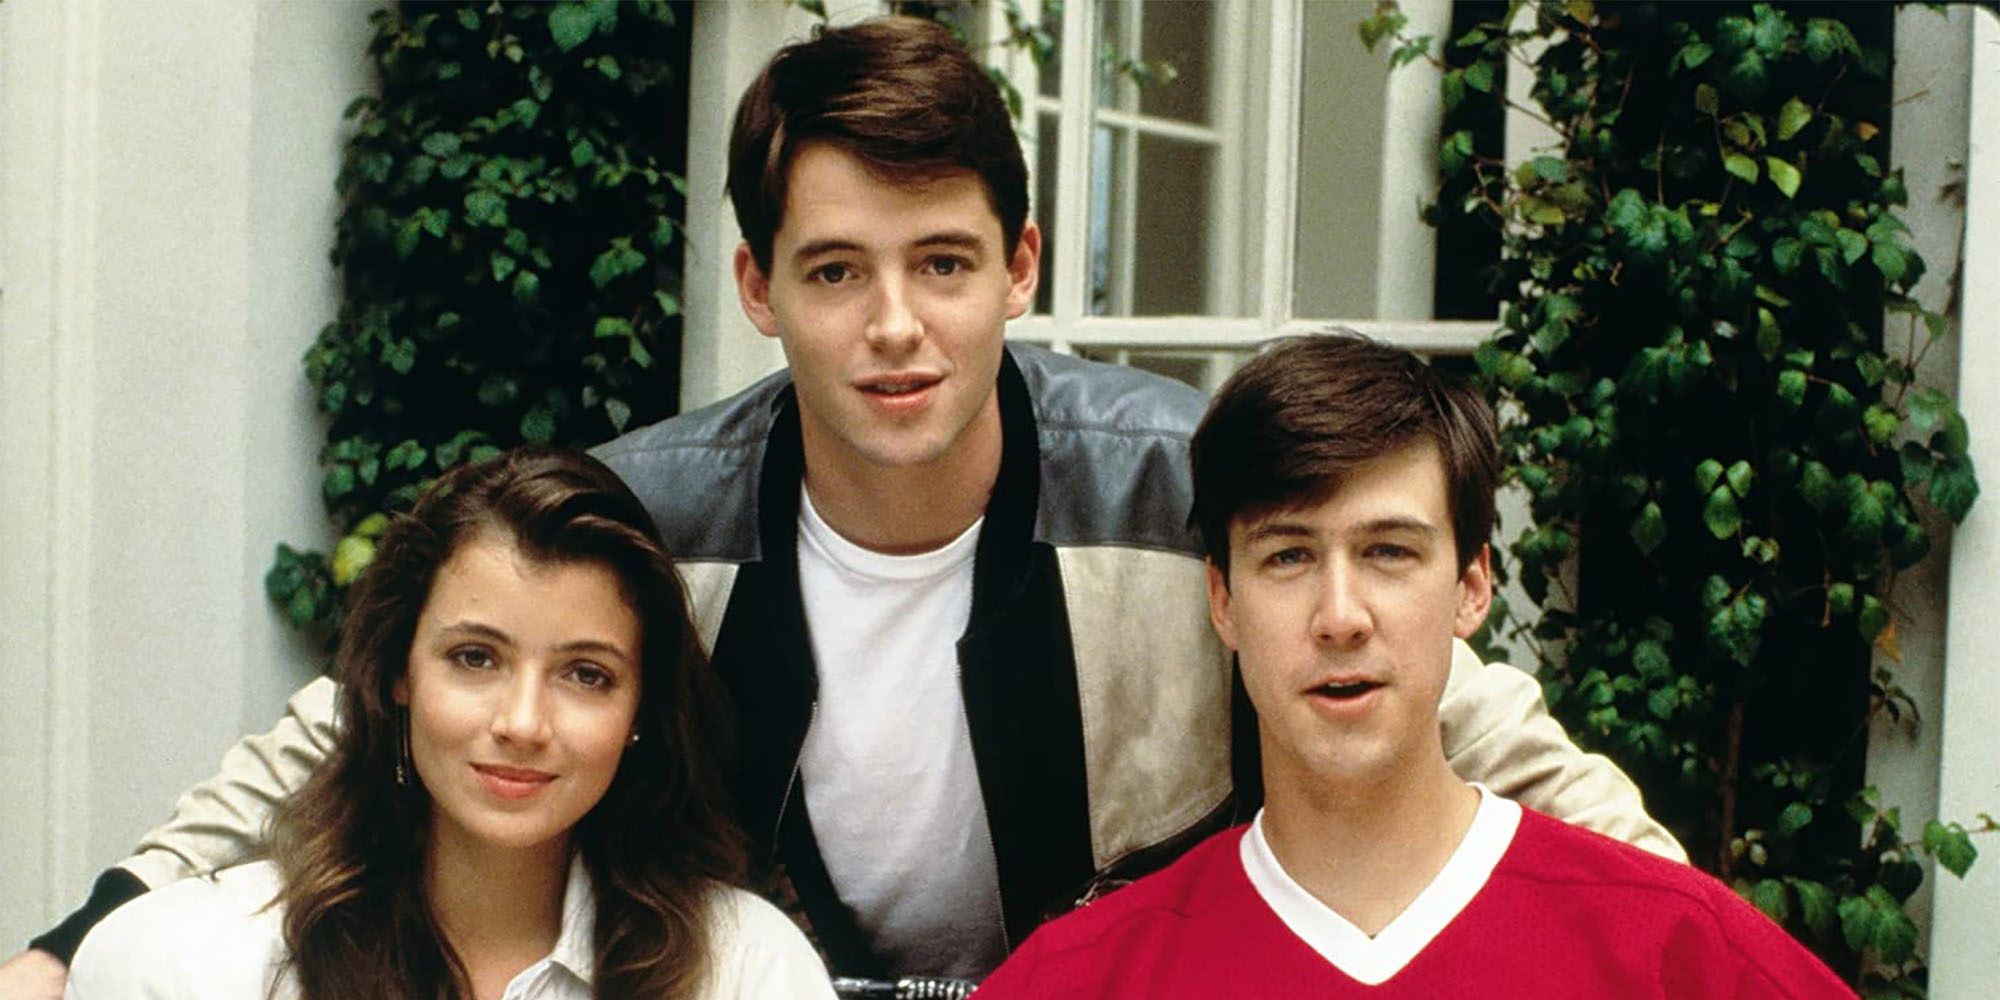 Ferris Bueller's Day Off is a famous '80s movie that deserves a reboot